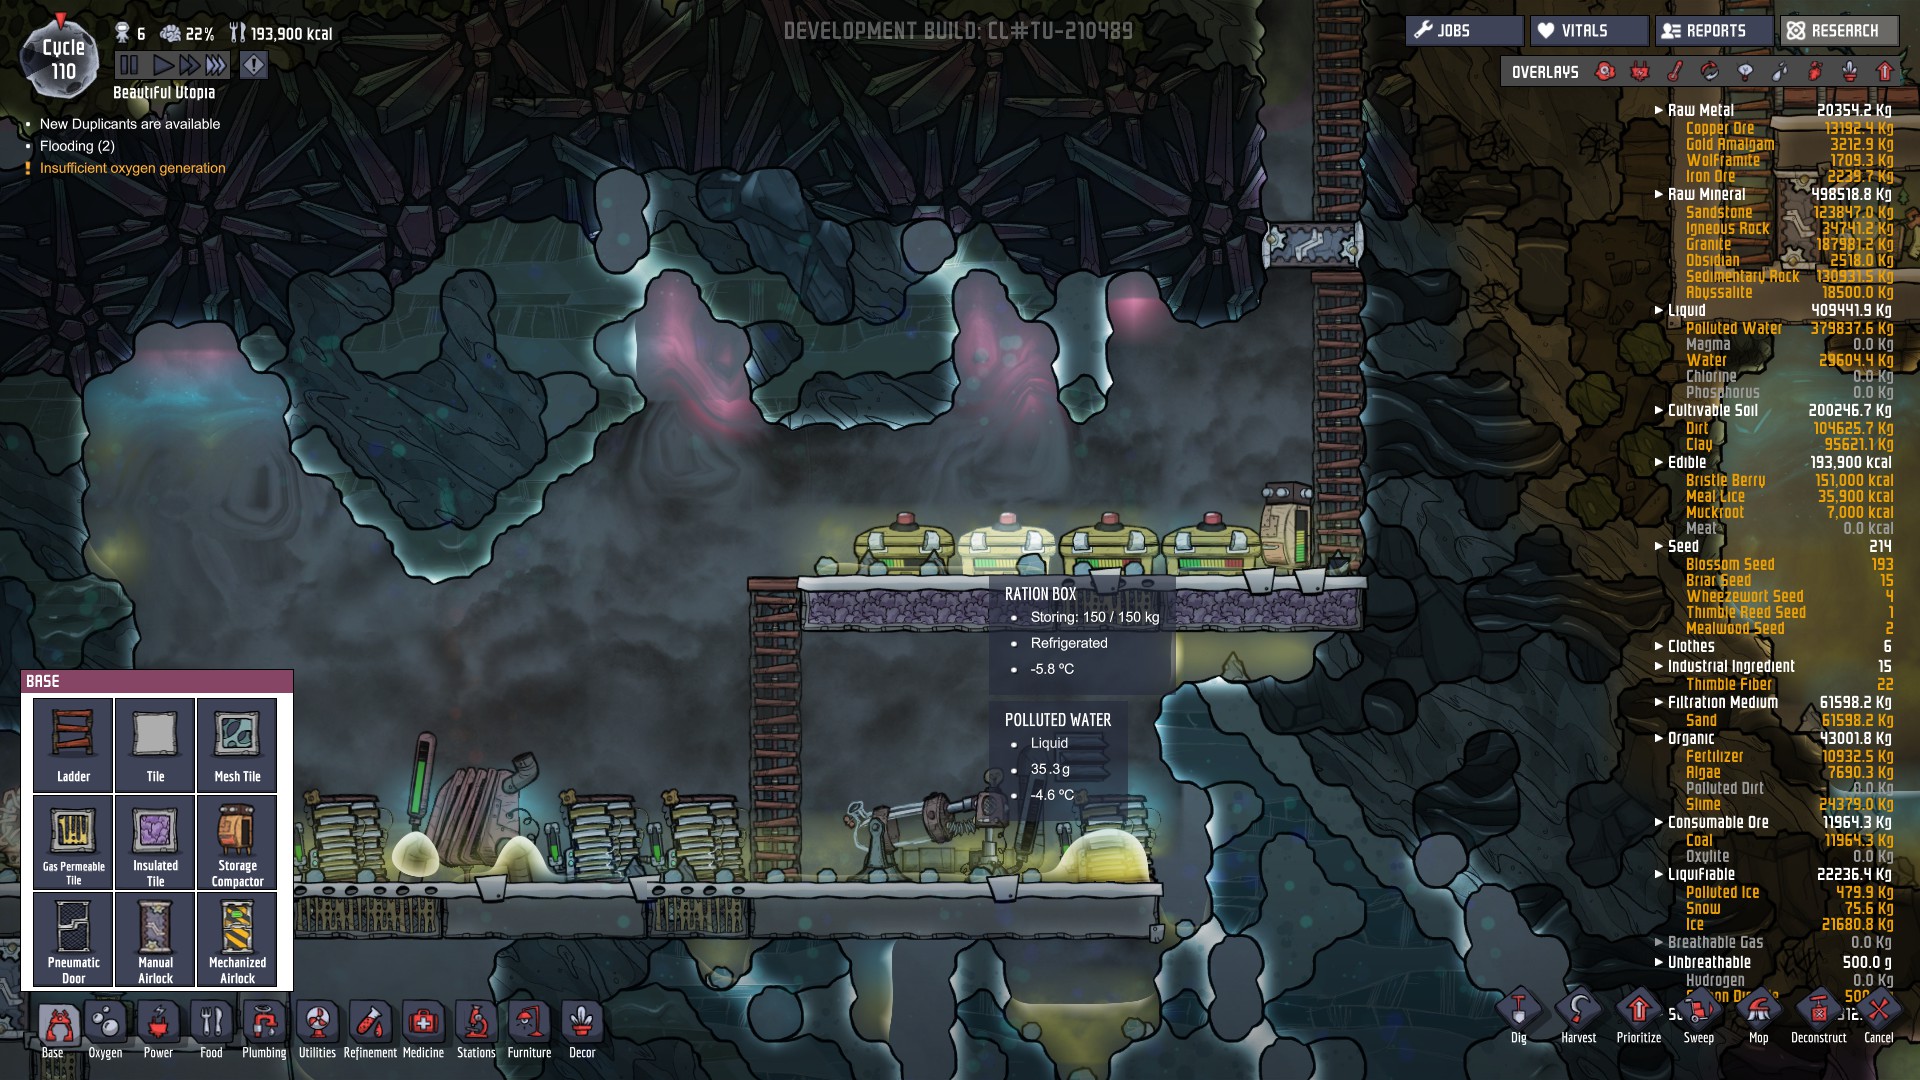 oxygen not included steam power